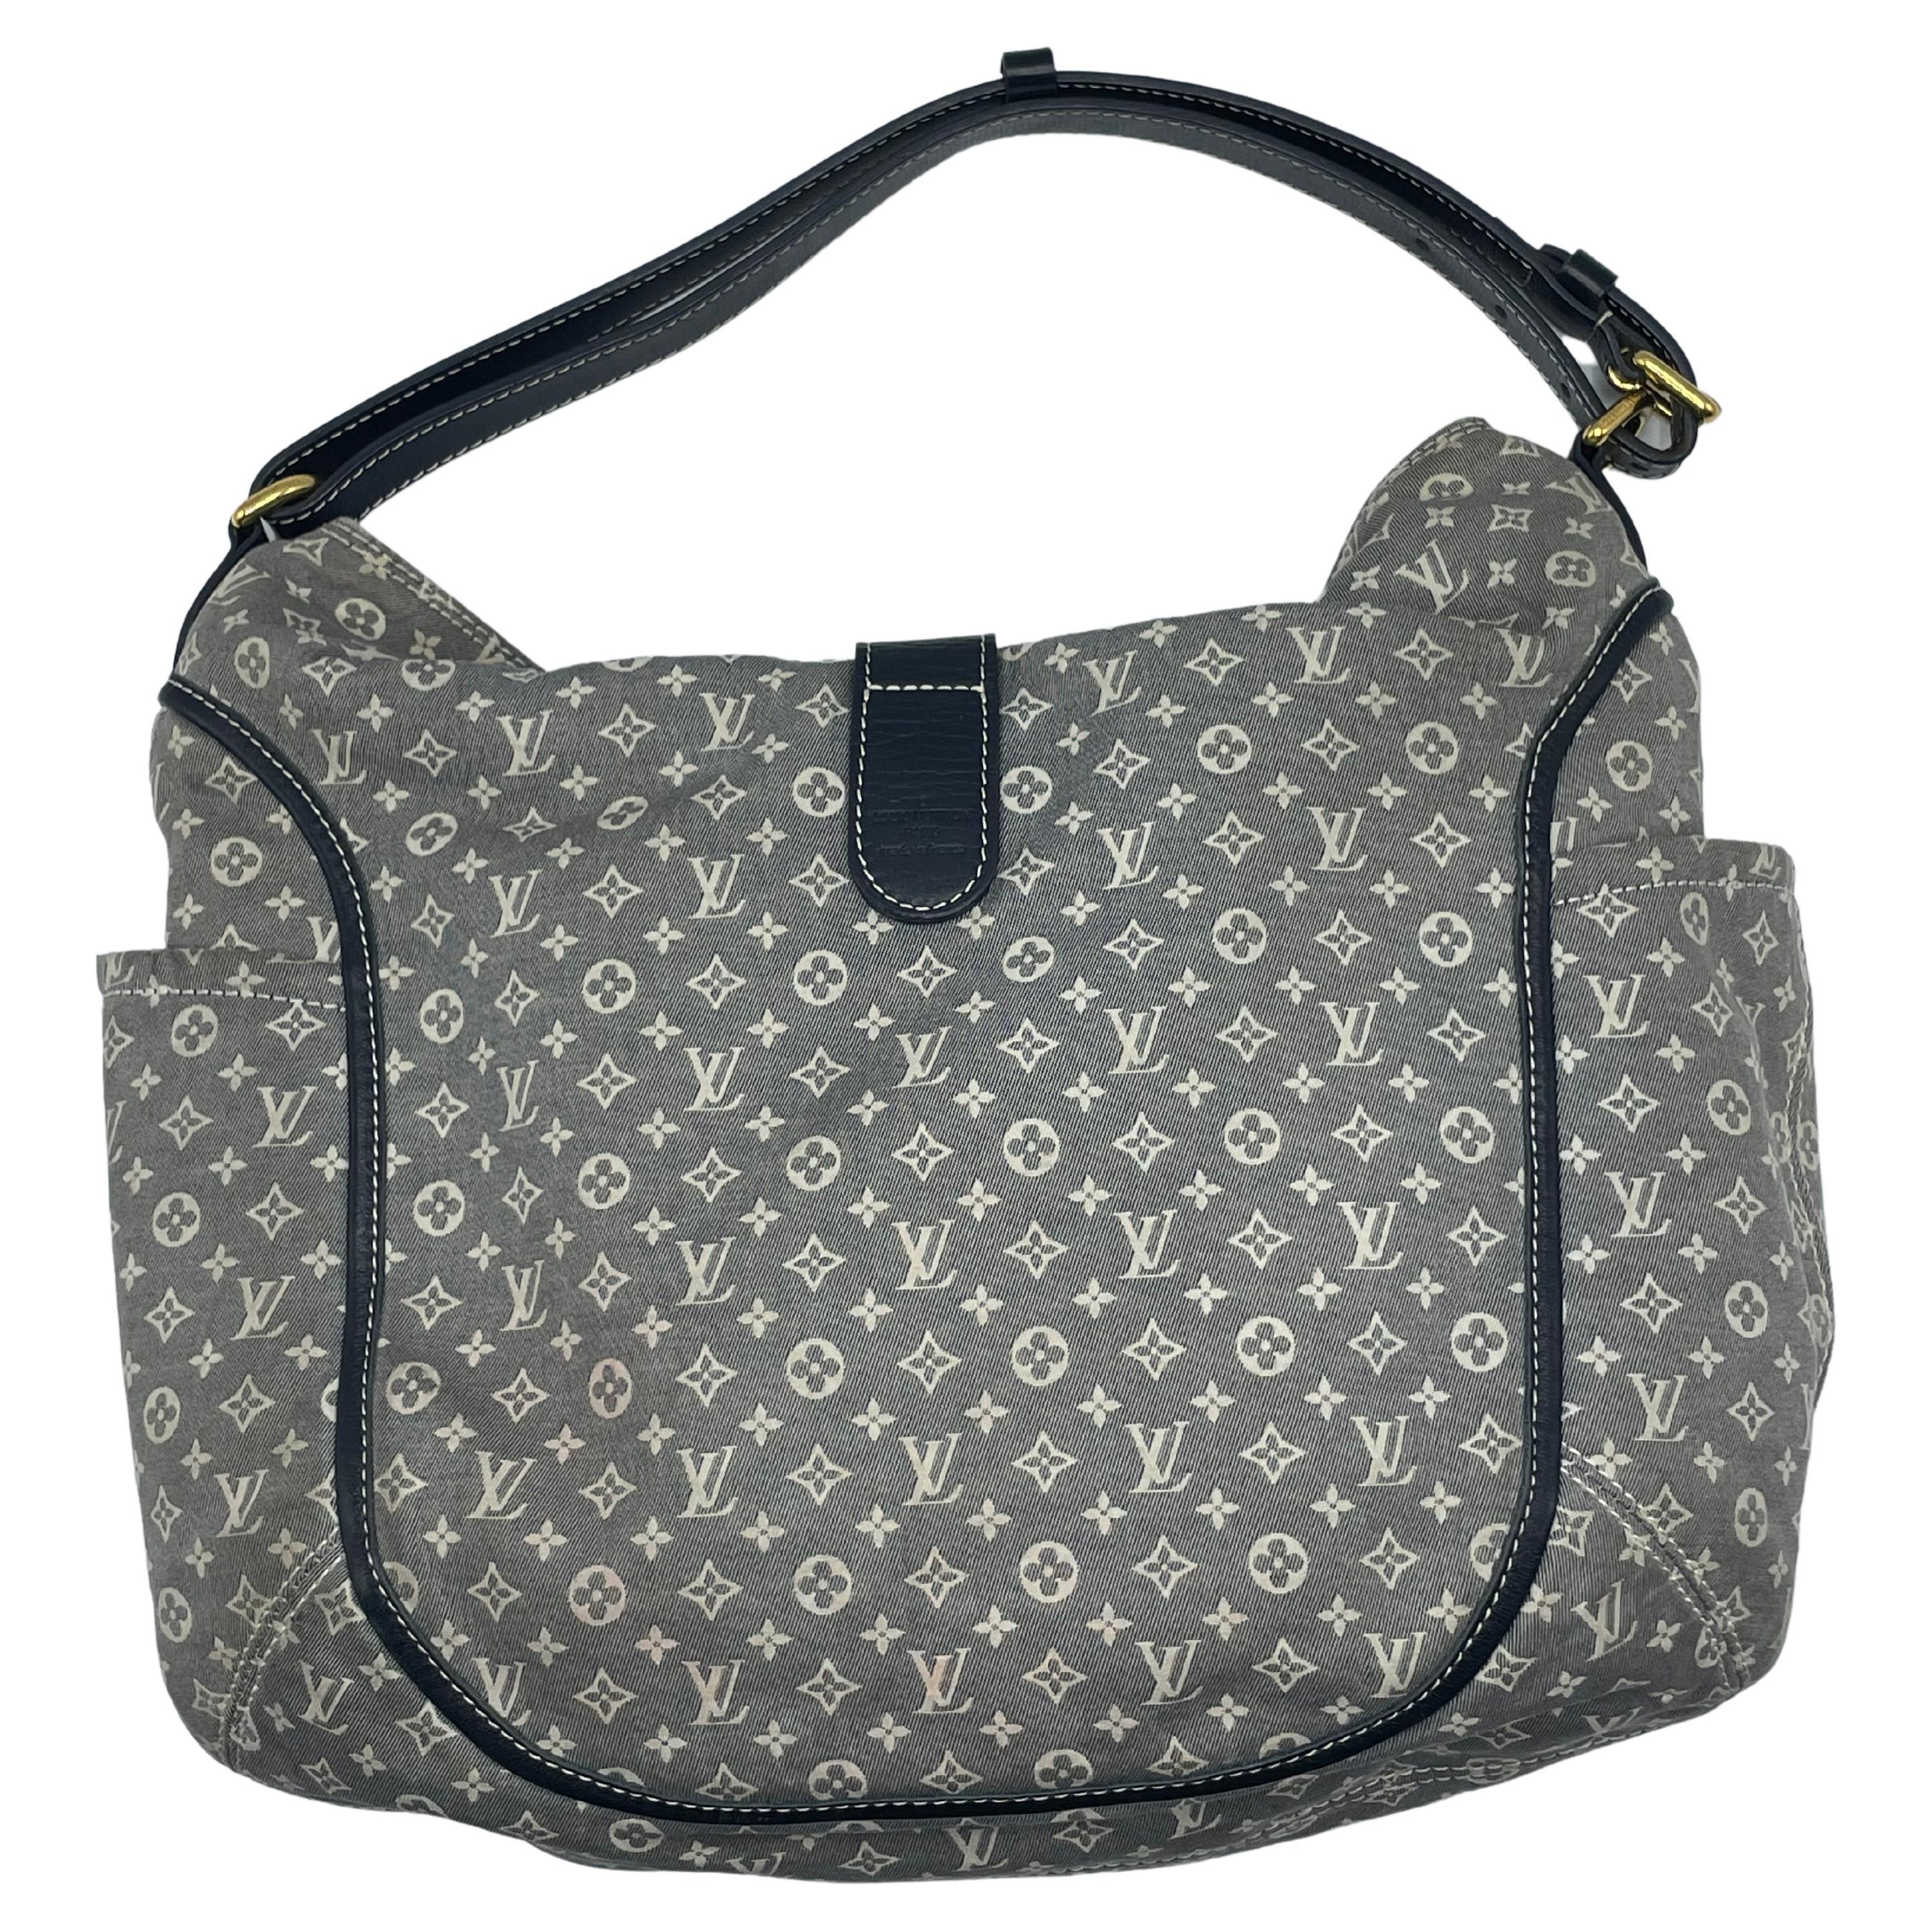 Blue and beige Louis Vuitton hobo bag with monogramming, encircled by brass hardware and leather trim. The flat grip provided the ideal shoulder posture. The two outside pockets provide enough storage space for your essentials. The renowned push